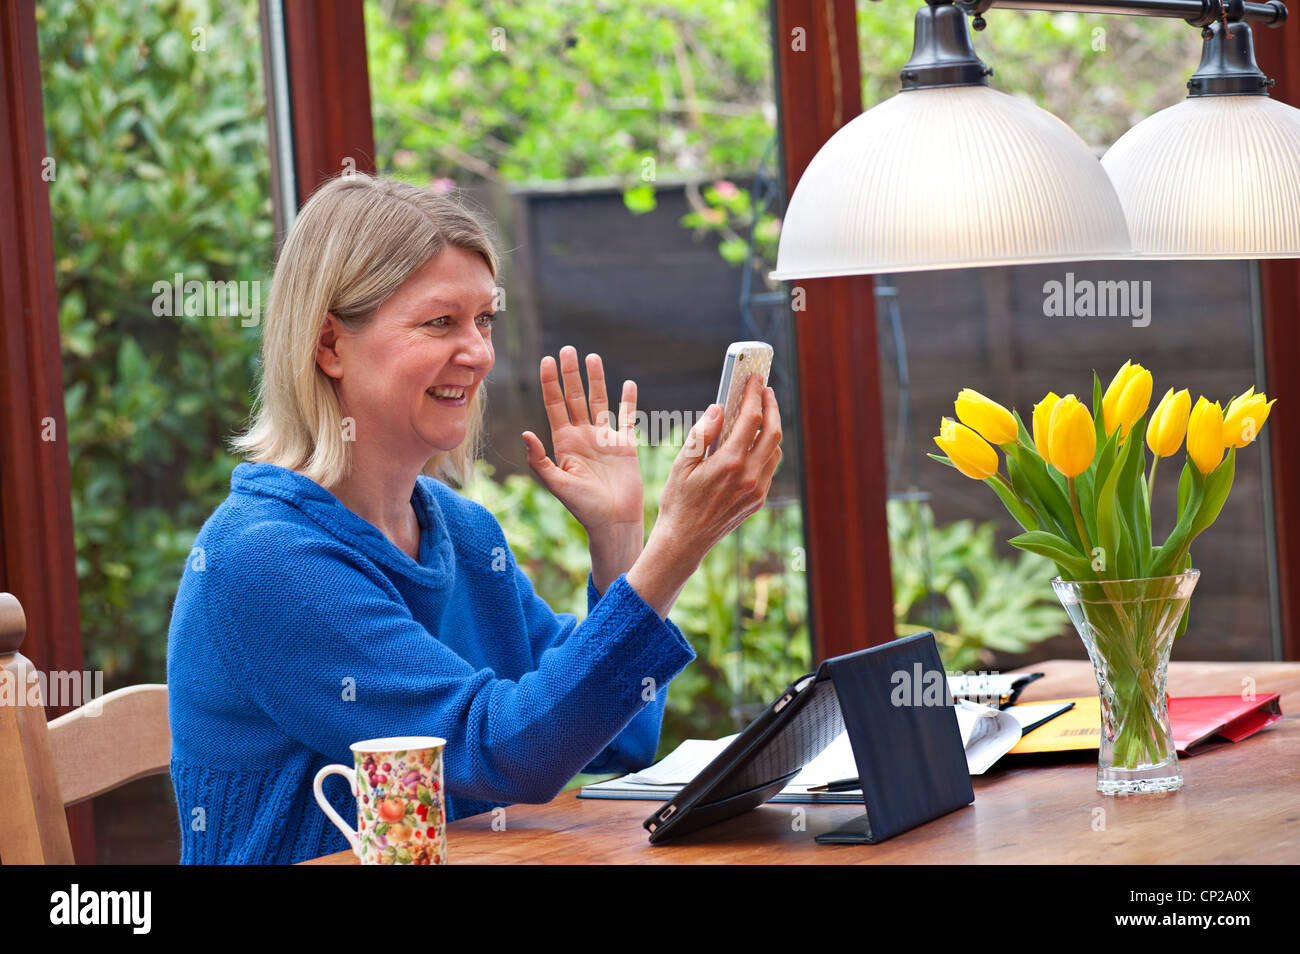 Blond woman at home in garden conservatory using her iPad tablet computer and using video call on her iPhone 4s smartphone Stock Photo